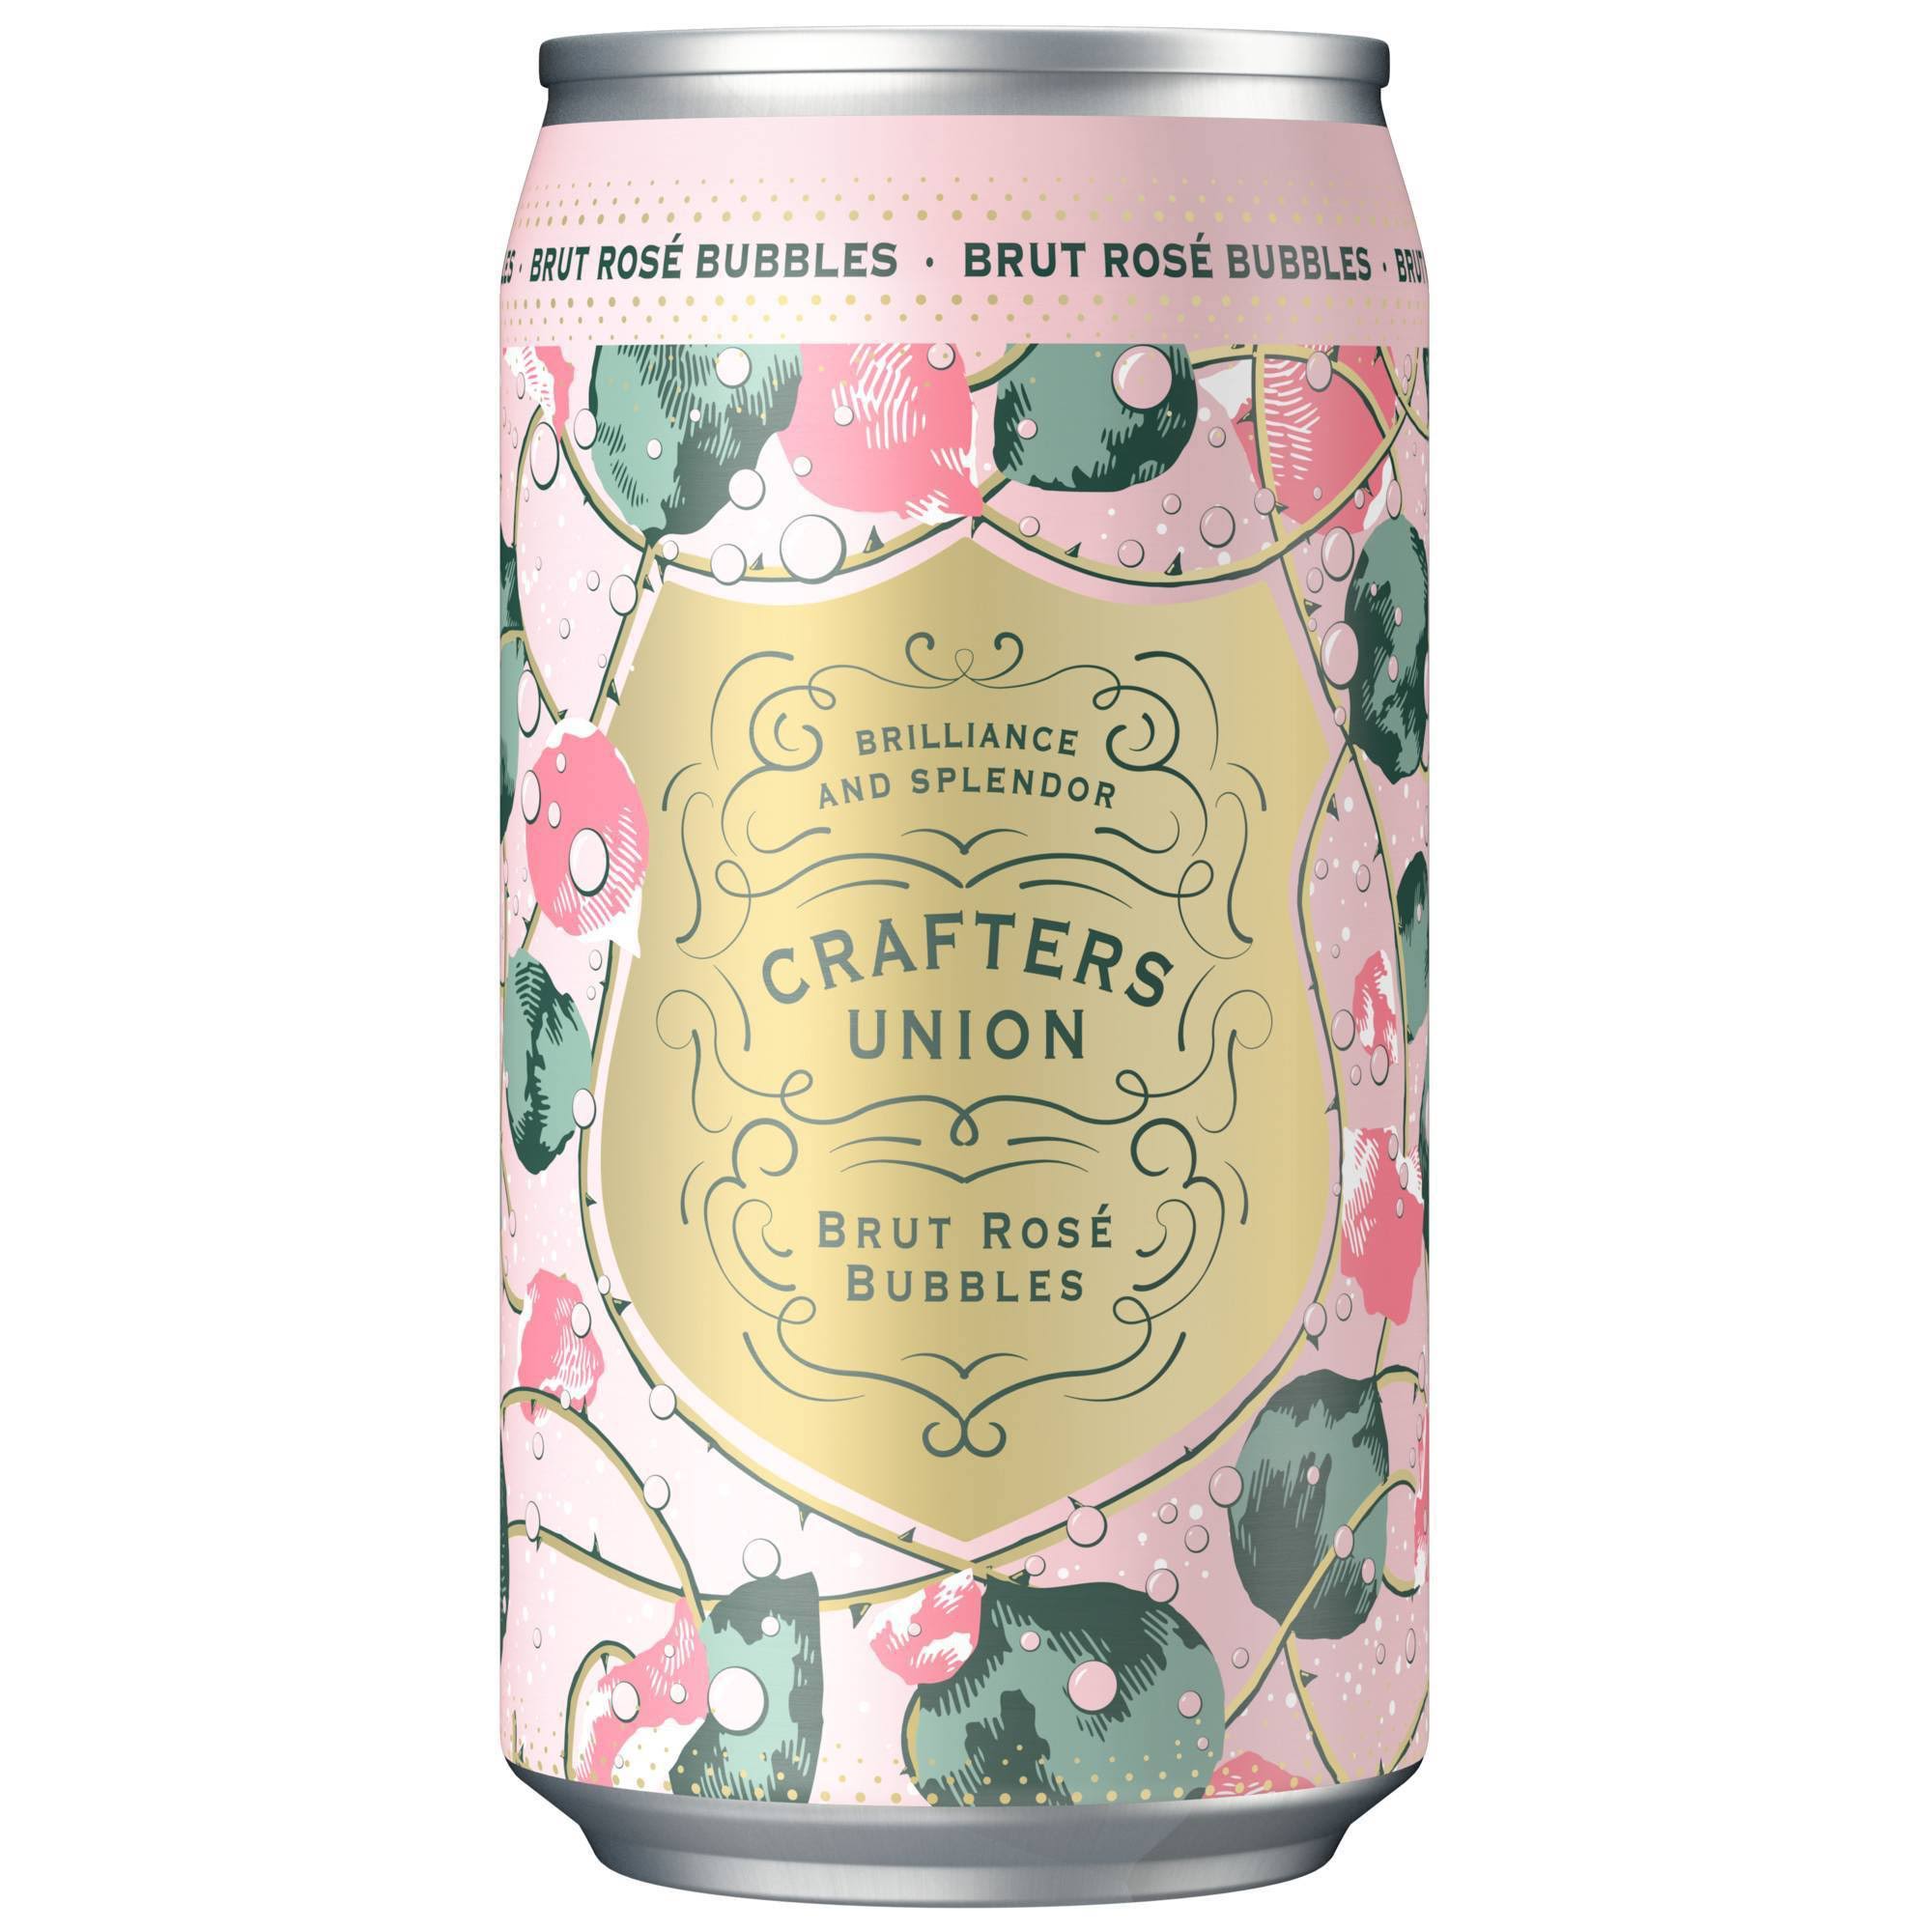 Crafters Union Brut Rose Bubbles - 375 ml